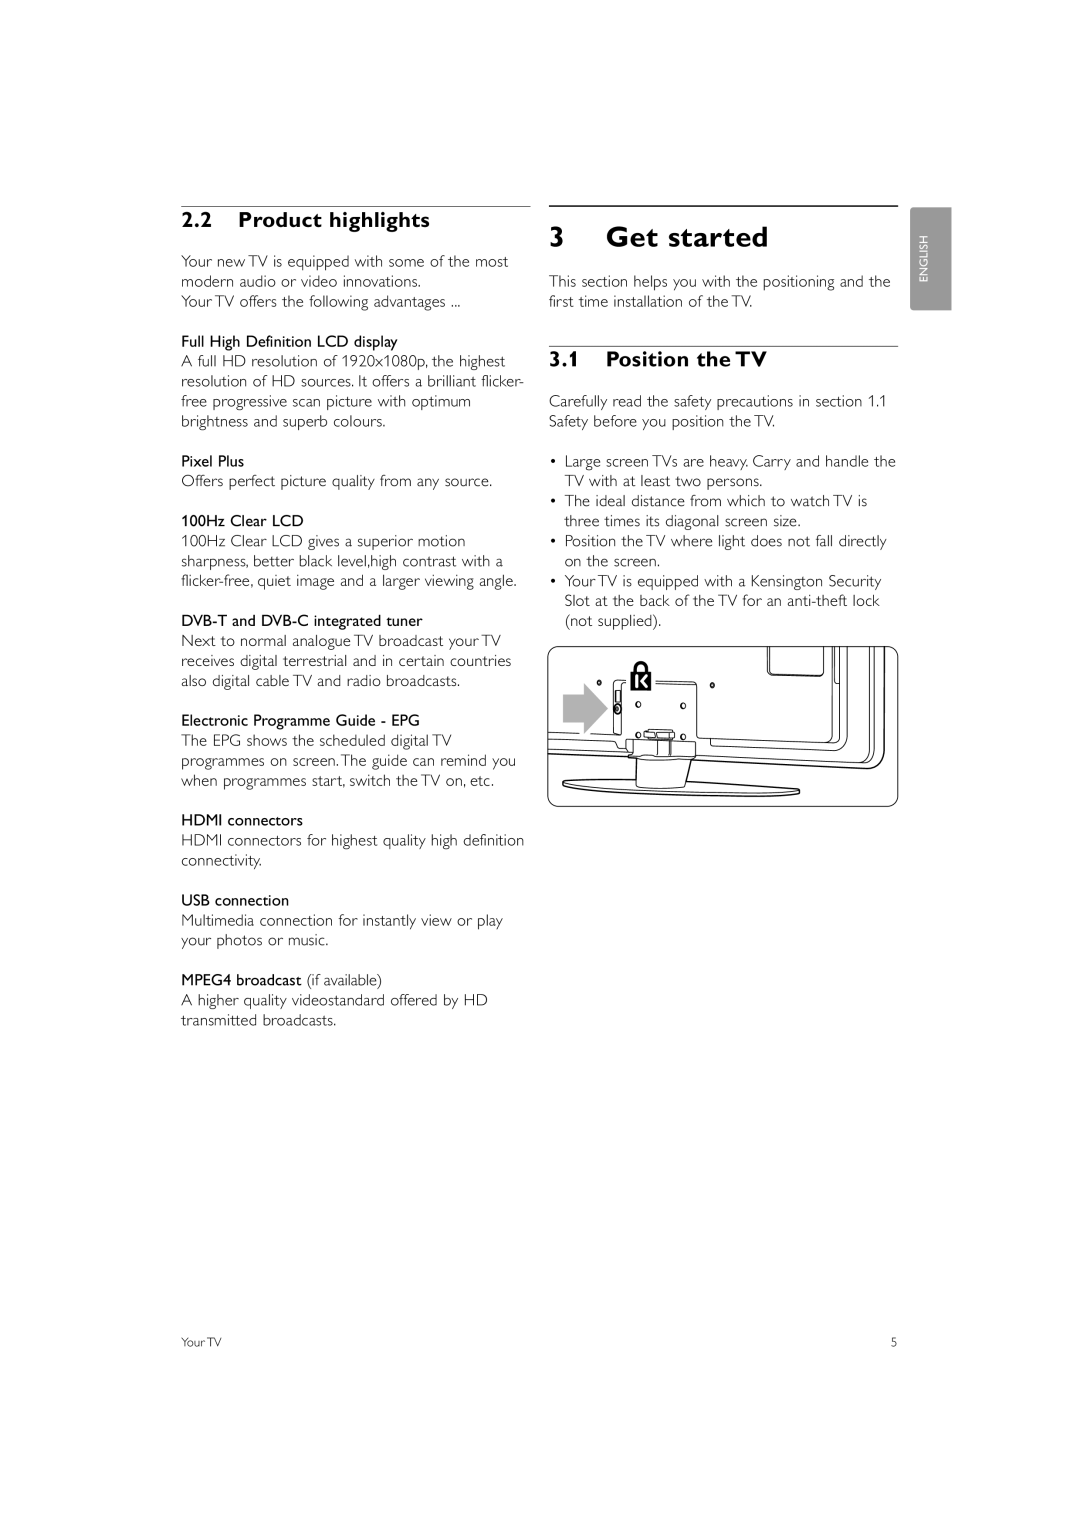 Philips 37PFL7403 manual Get started, Product highlights, Position the TV 